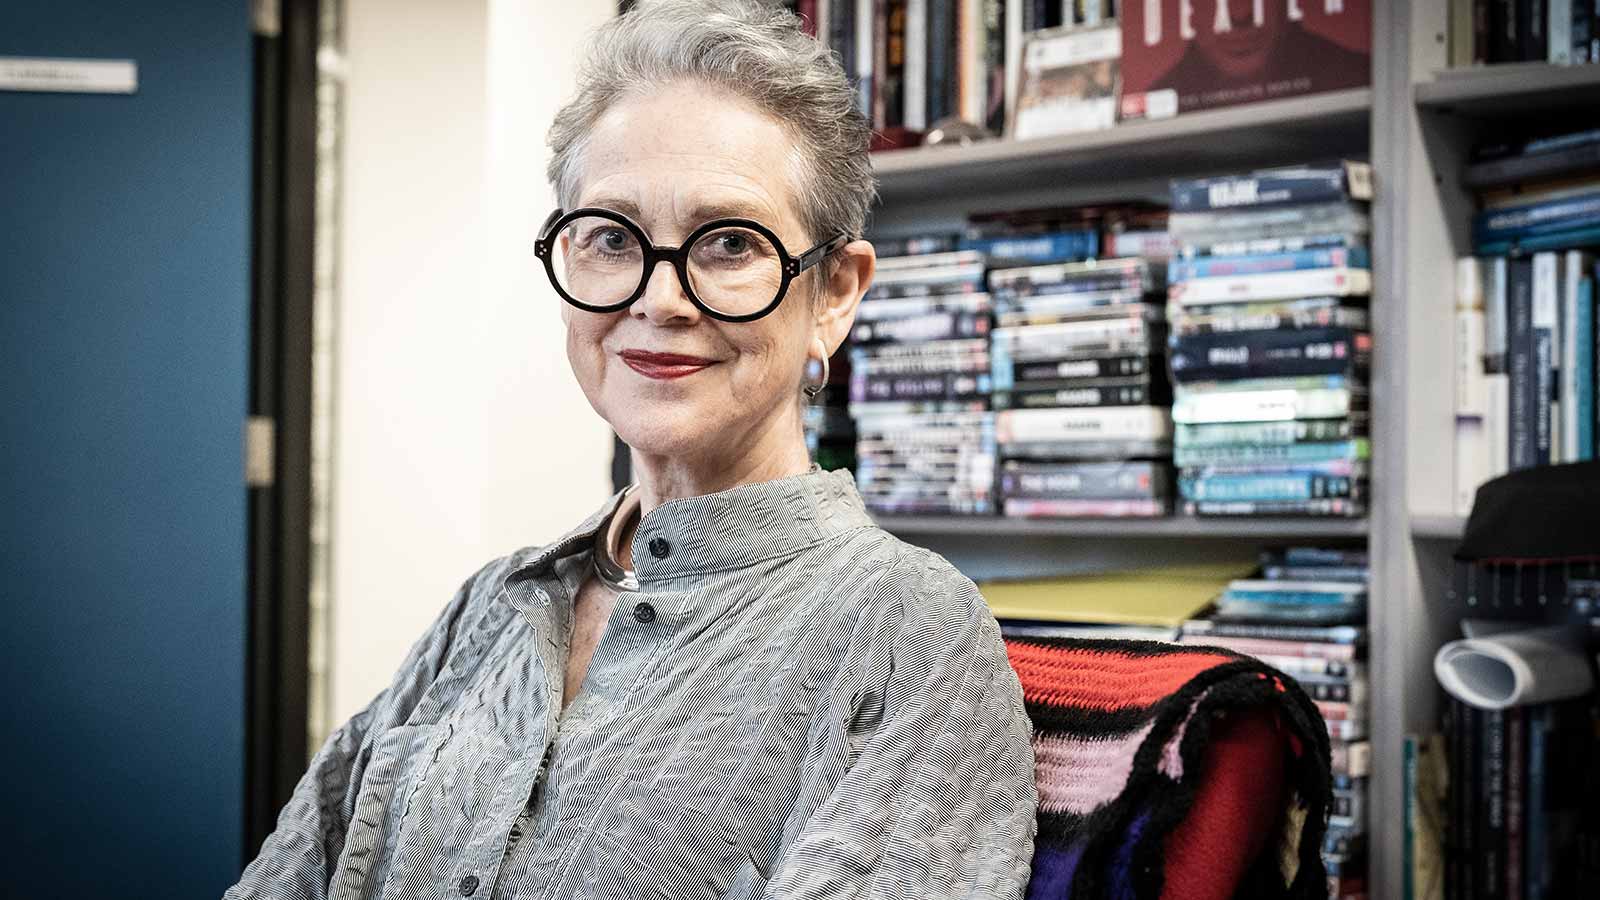 Sue Turnbull has pale skin and short, light hair. She is standing in front of a book shelf covered in crime books and films.